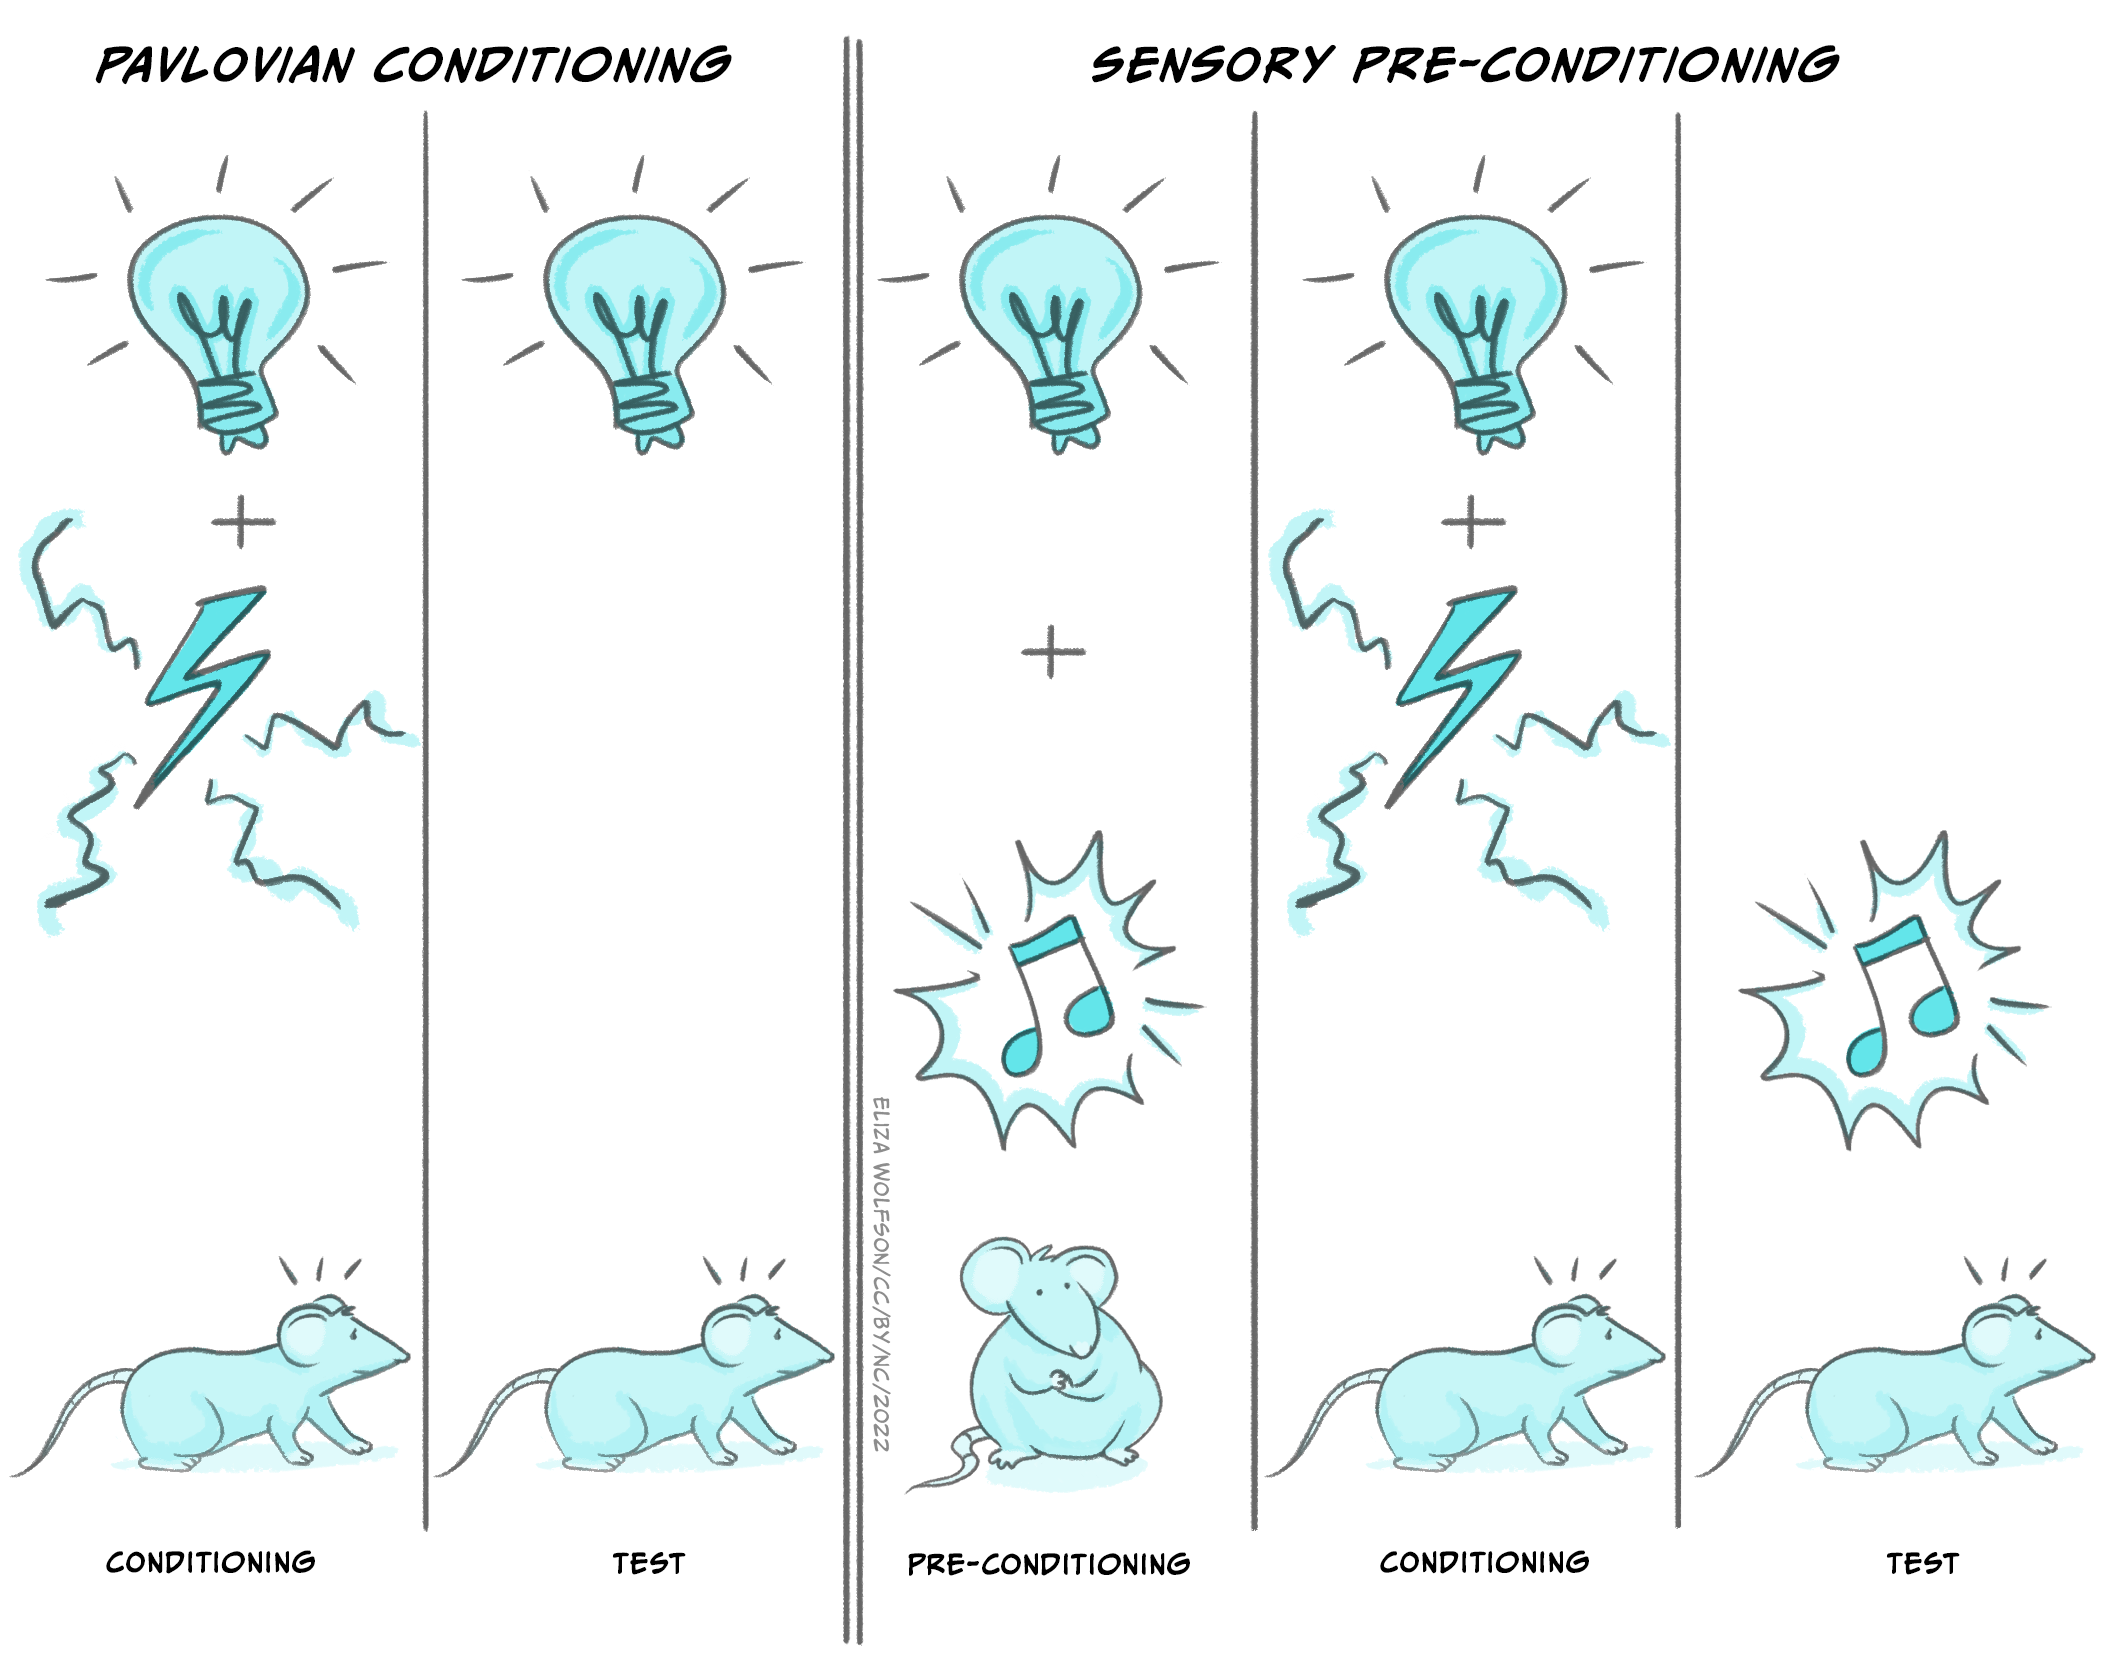 Cartoon drawing of mouse and lightbulb illustrating Pavlovian conditioning and sensory pre-conditioning